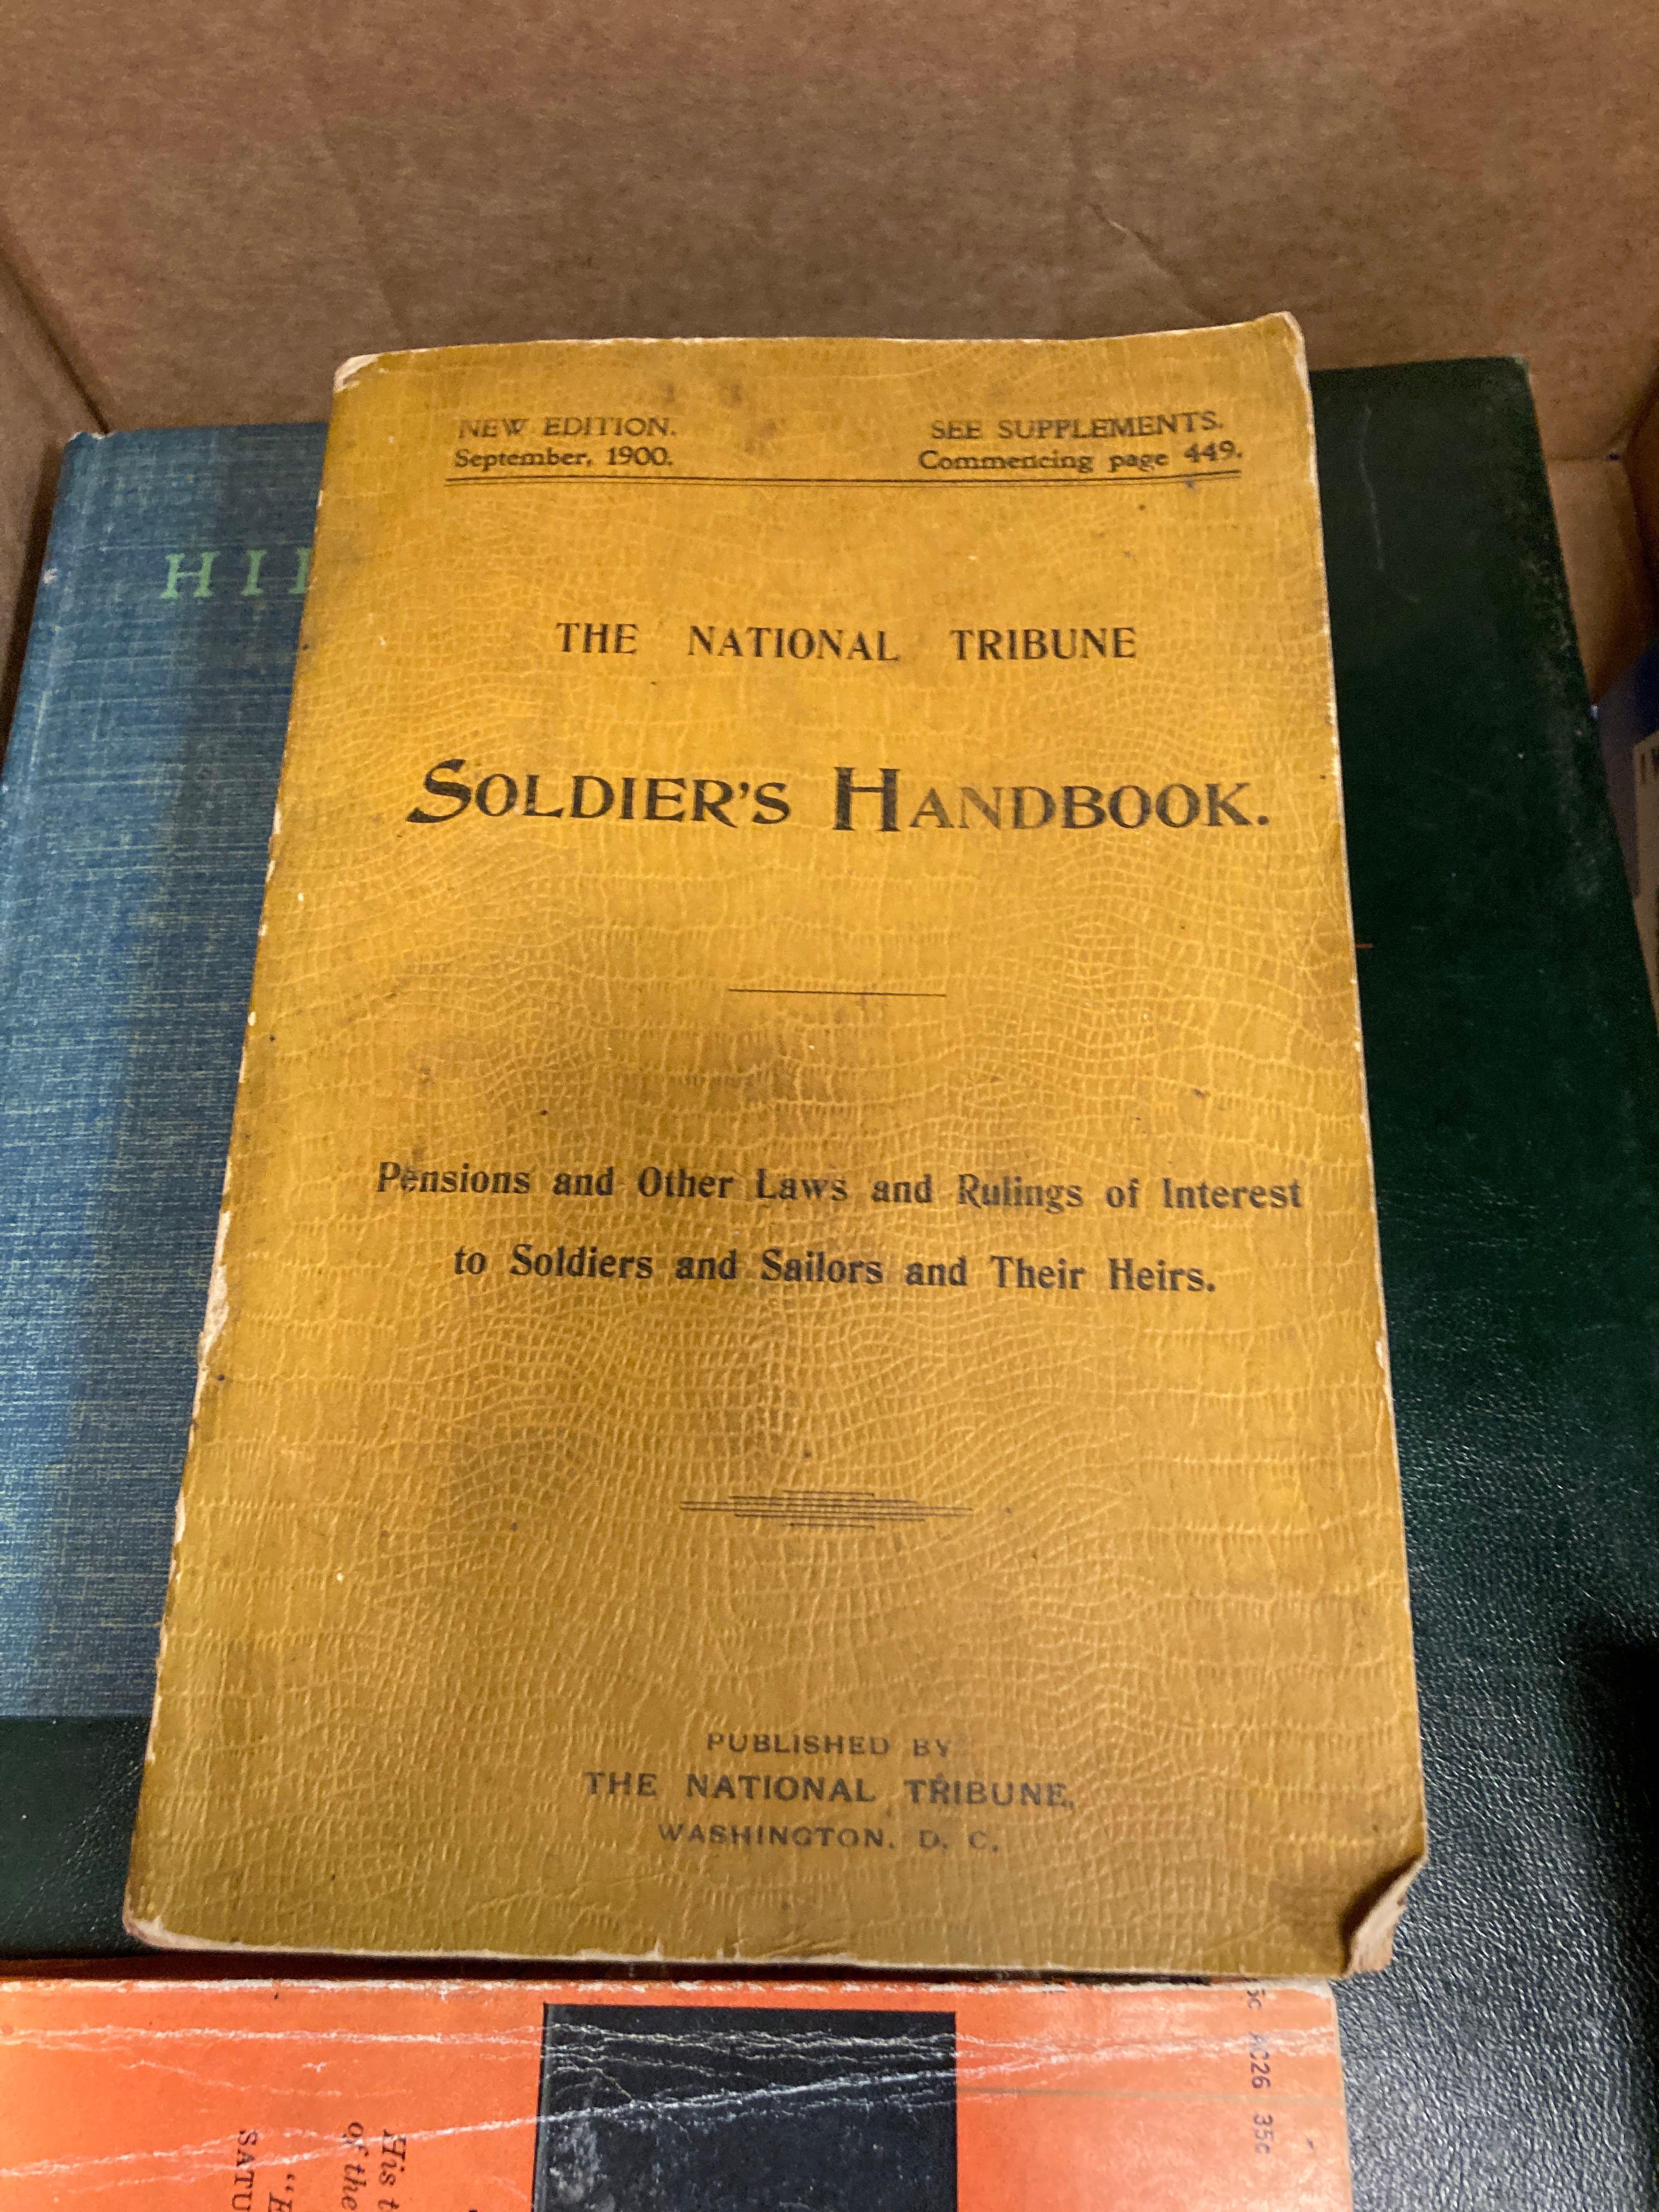 The national tribute soldiers, handbook, 1900 addition